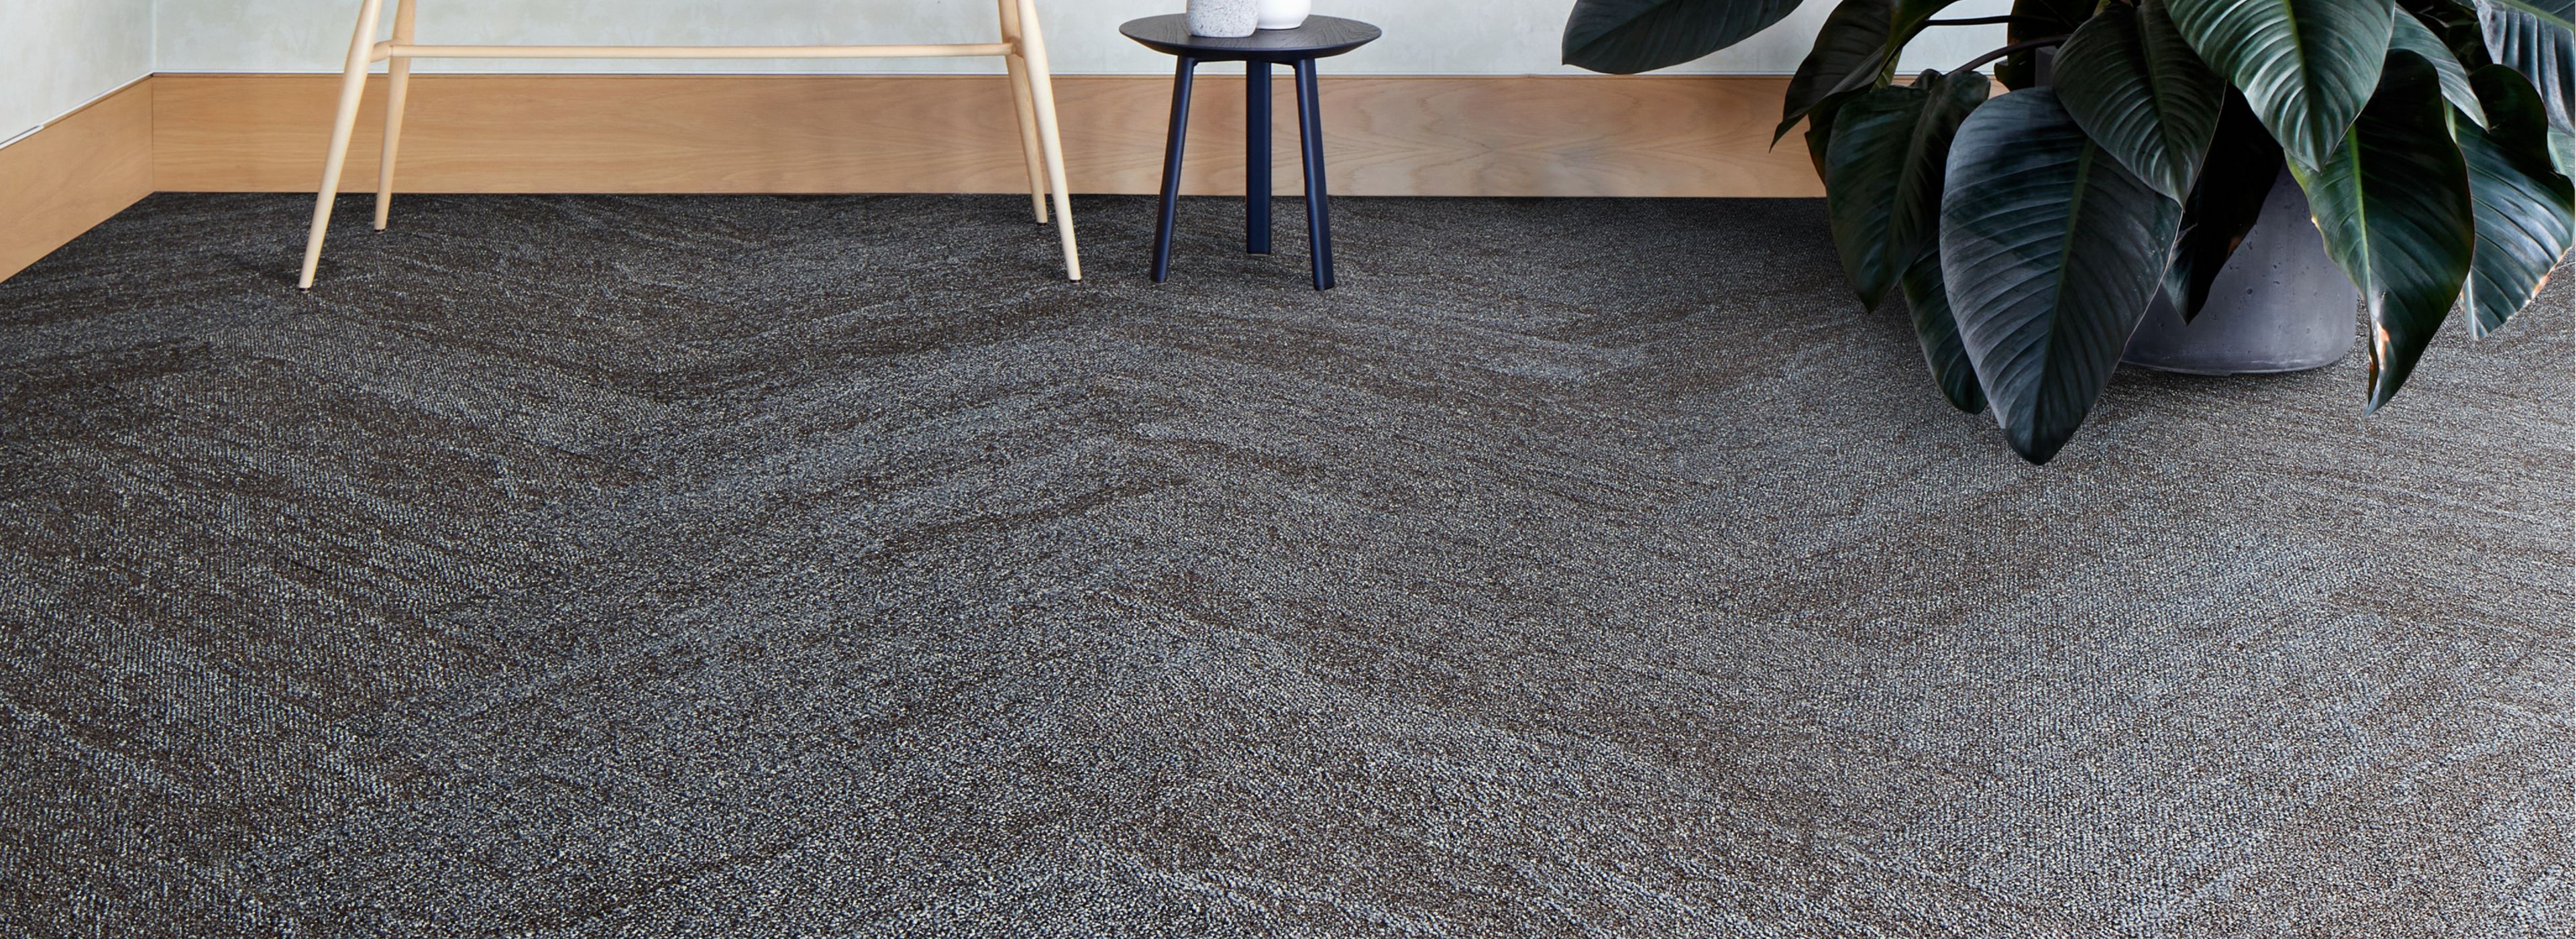 Interface Mesa plank carpet tile  in a lobby with seating and large plant numéro d’image 1